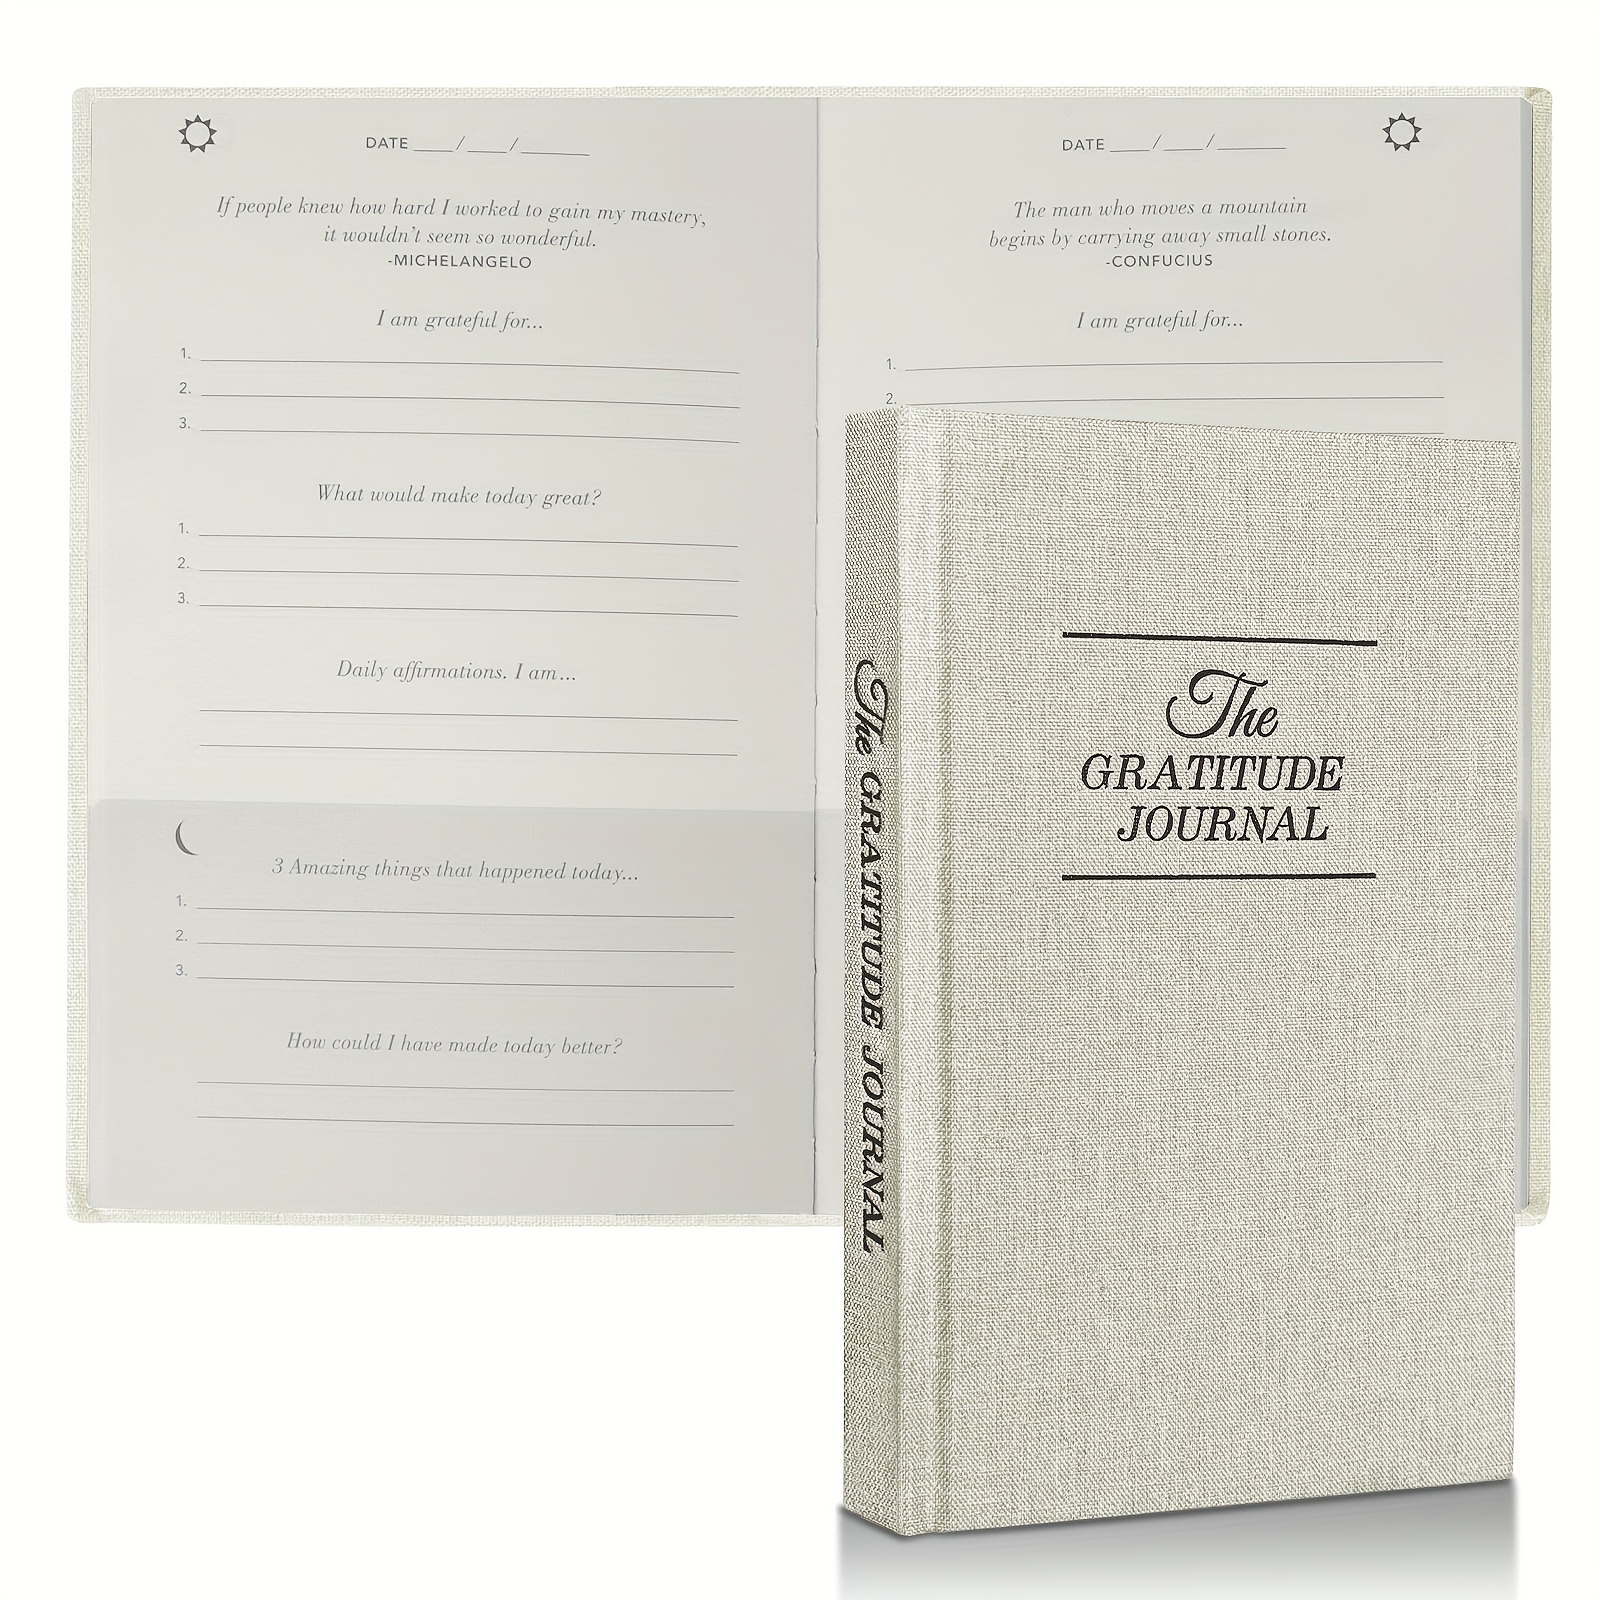 

The Gratitude Journal: 5 Minute Journal - Daily Affirmations With Simple Guided Format - Undated Life Planner, 5 Minute Guide Daily Planner, For More Happiness, Positivity, Affirmation